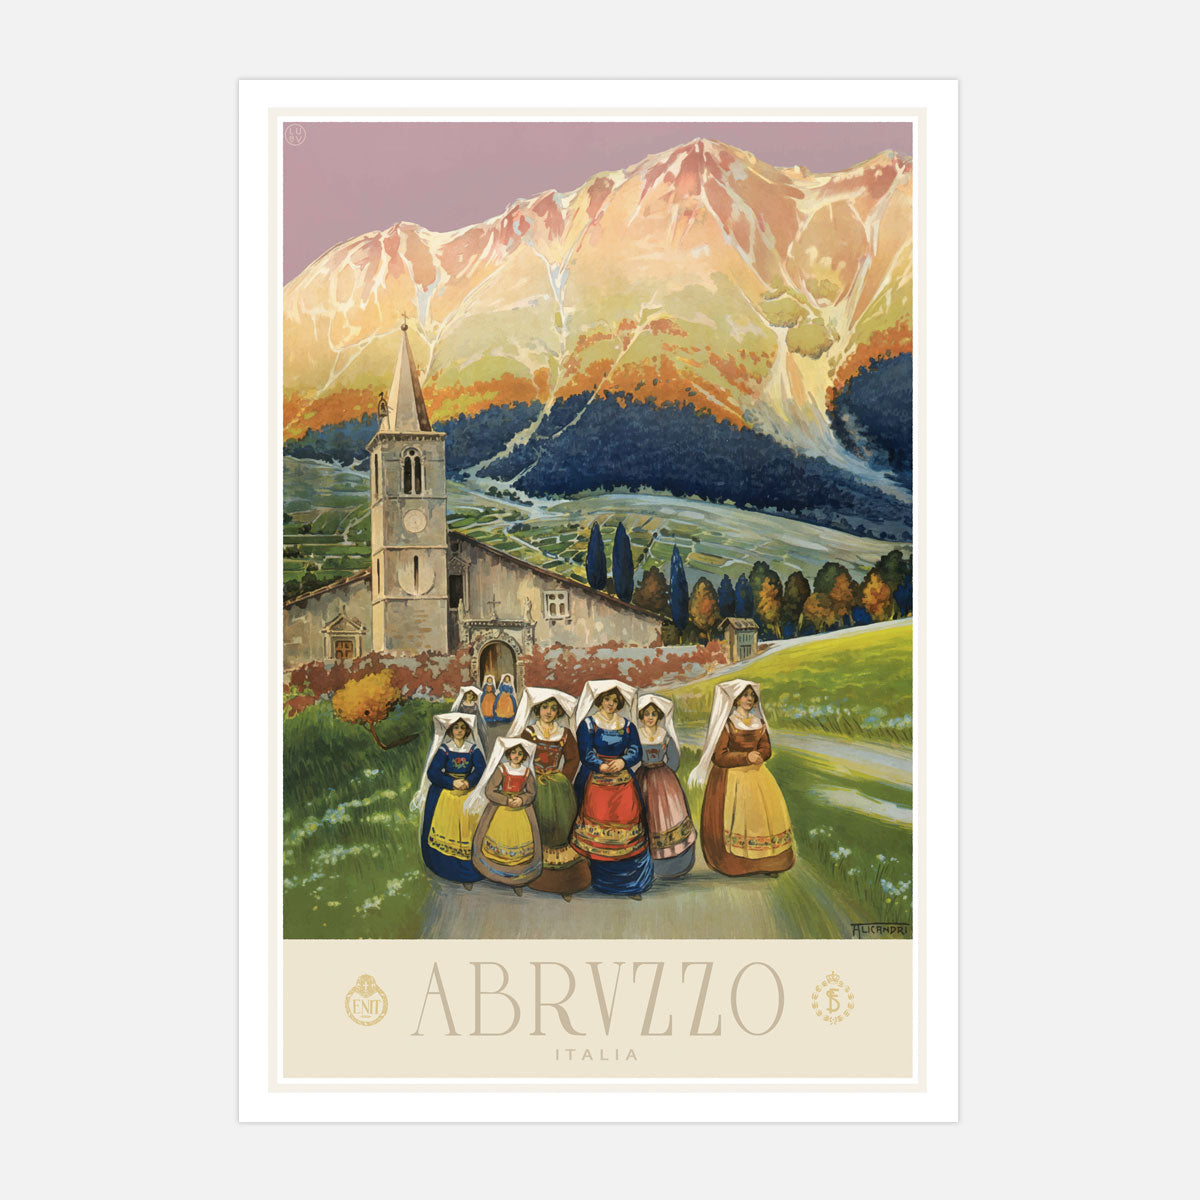 Abrvzzo Italy retro vintage poster from Places We Luv